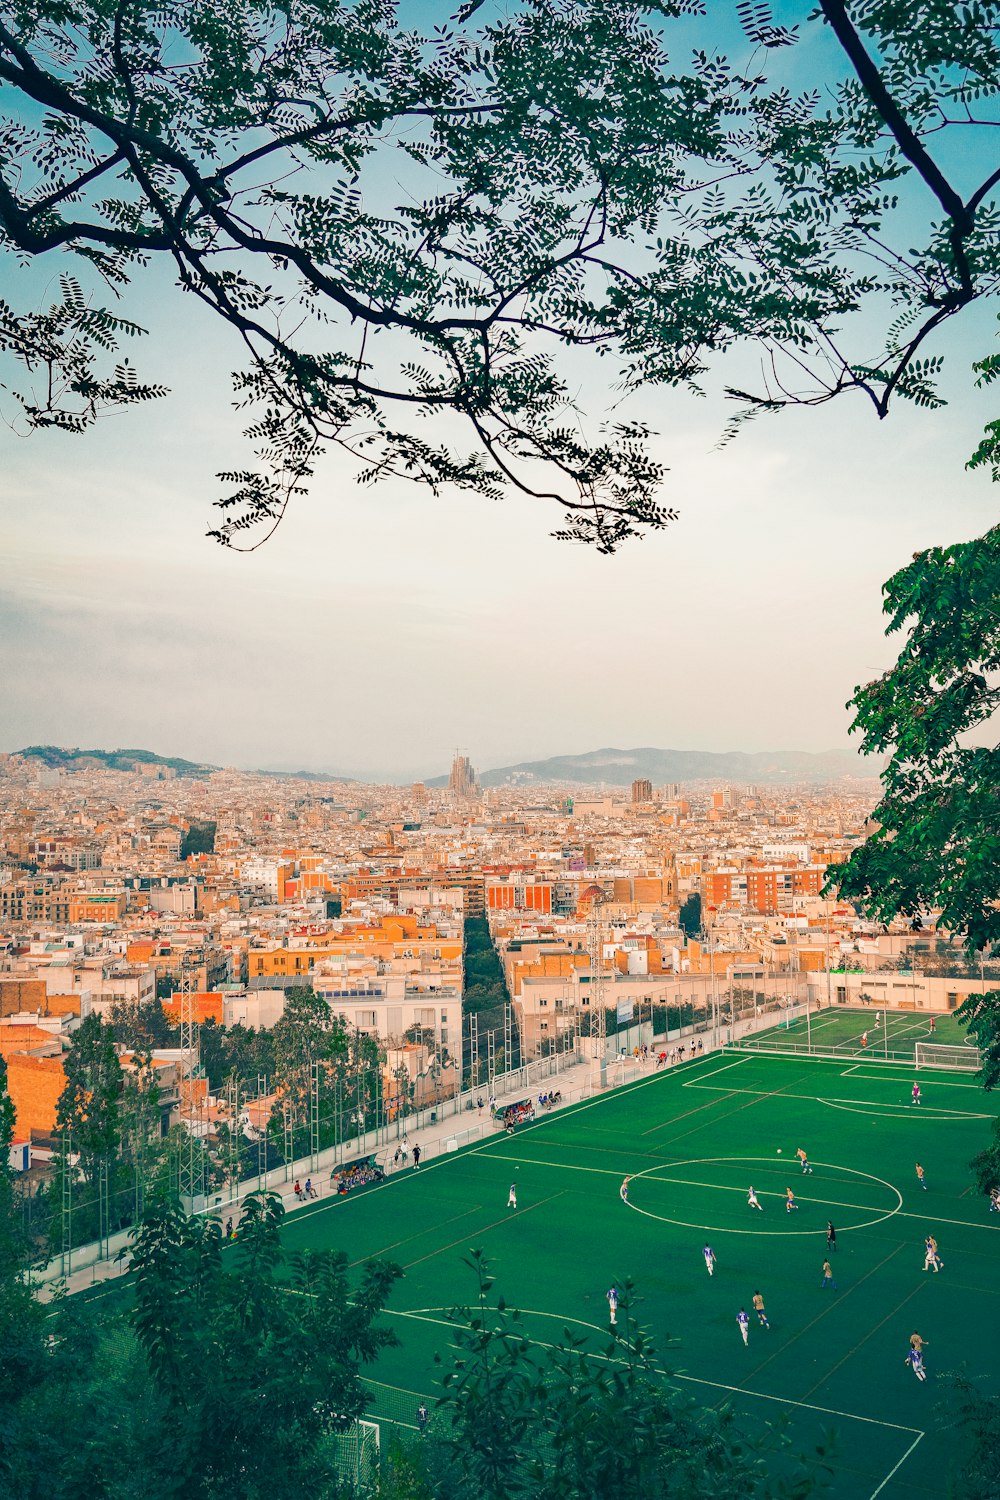 a soccer field with a view of a city